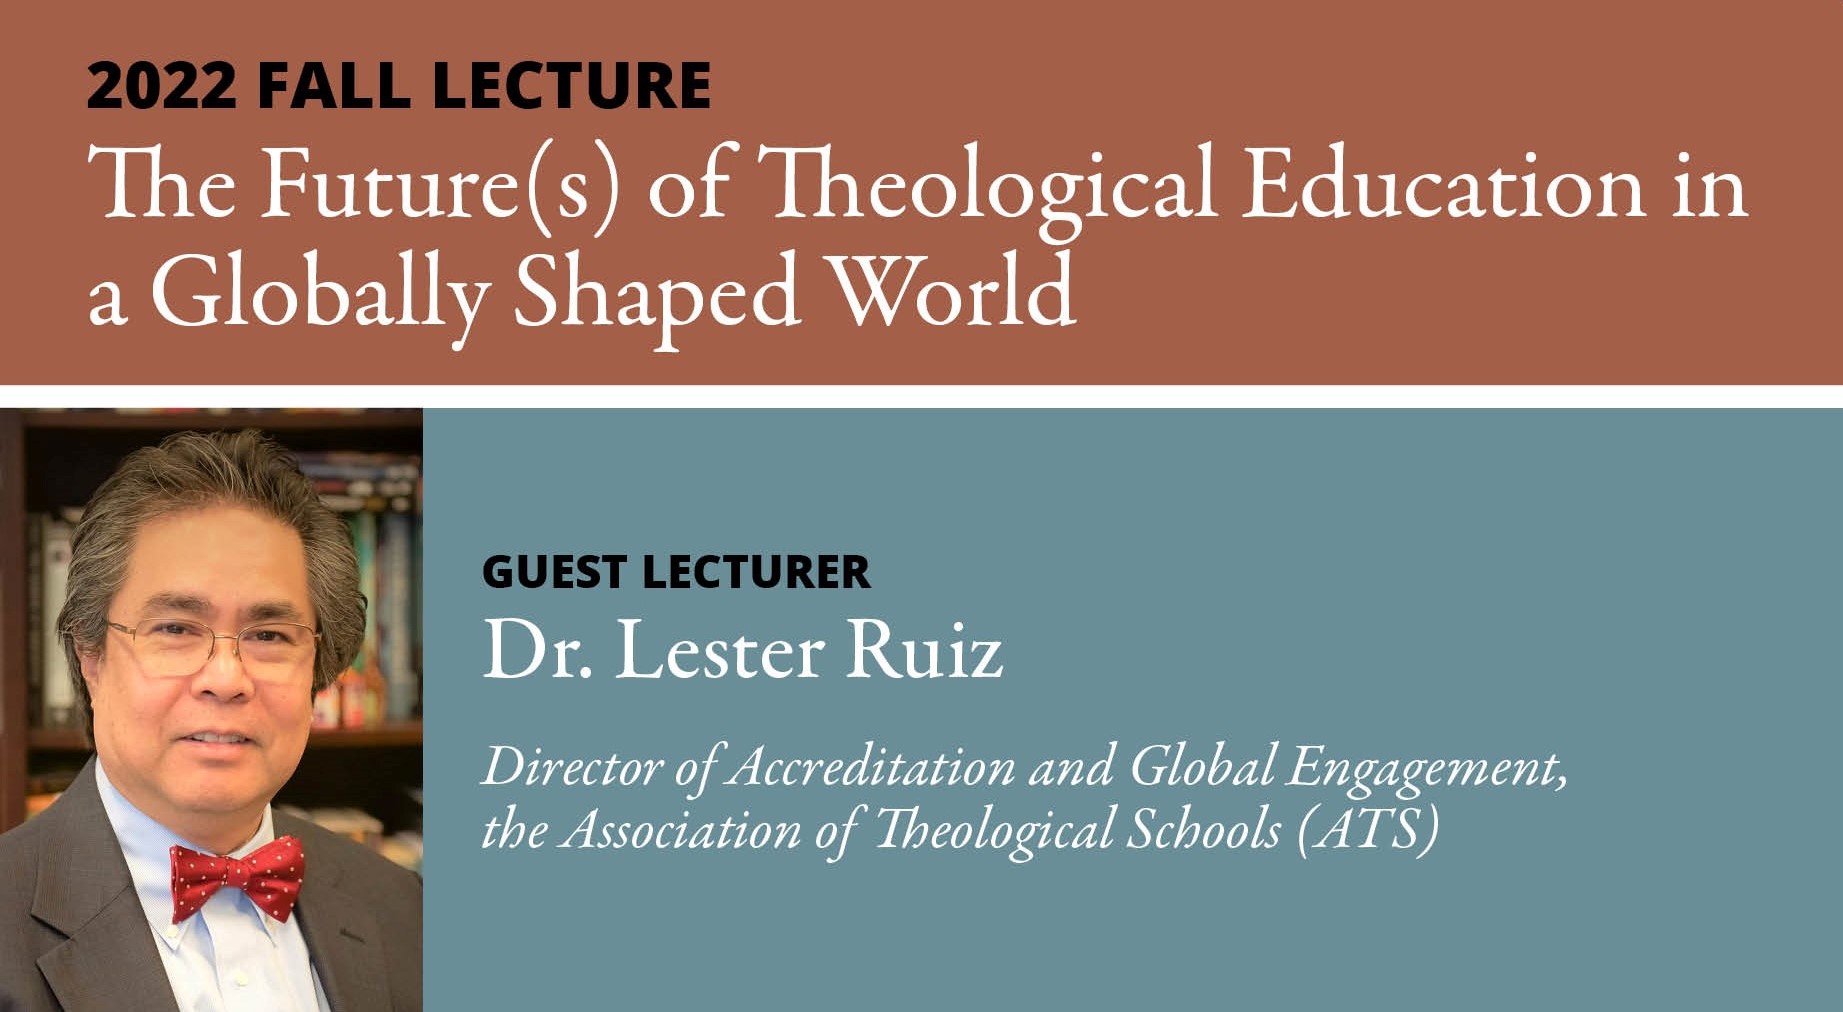 WATCH THE VIDEO: Lester Ruiz was the featured speaker for the Paul G. Hiebert Center for World Christianity and Global Theology's fall 2022 lecture at Trinity Evangelical Divinity School. (PART 2)